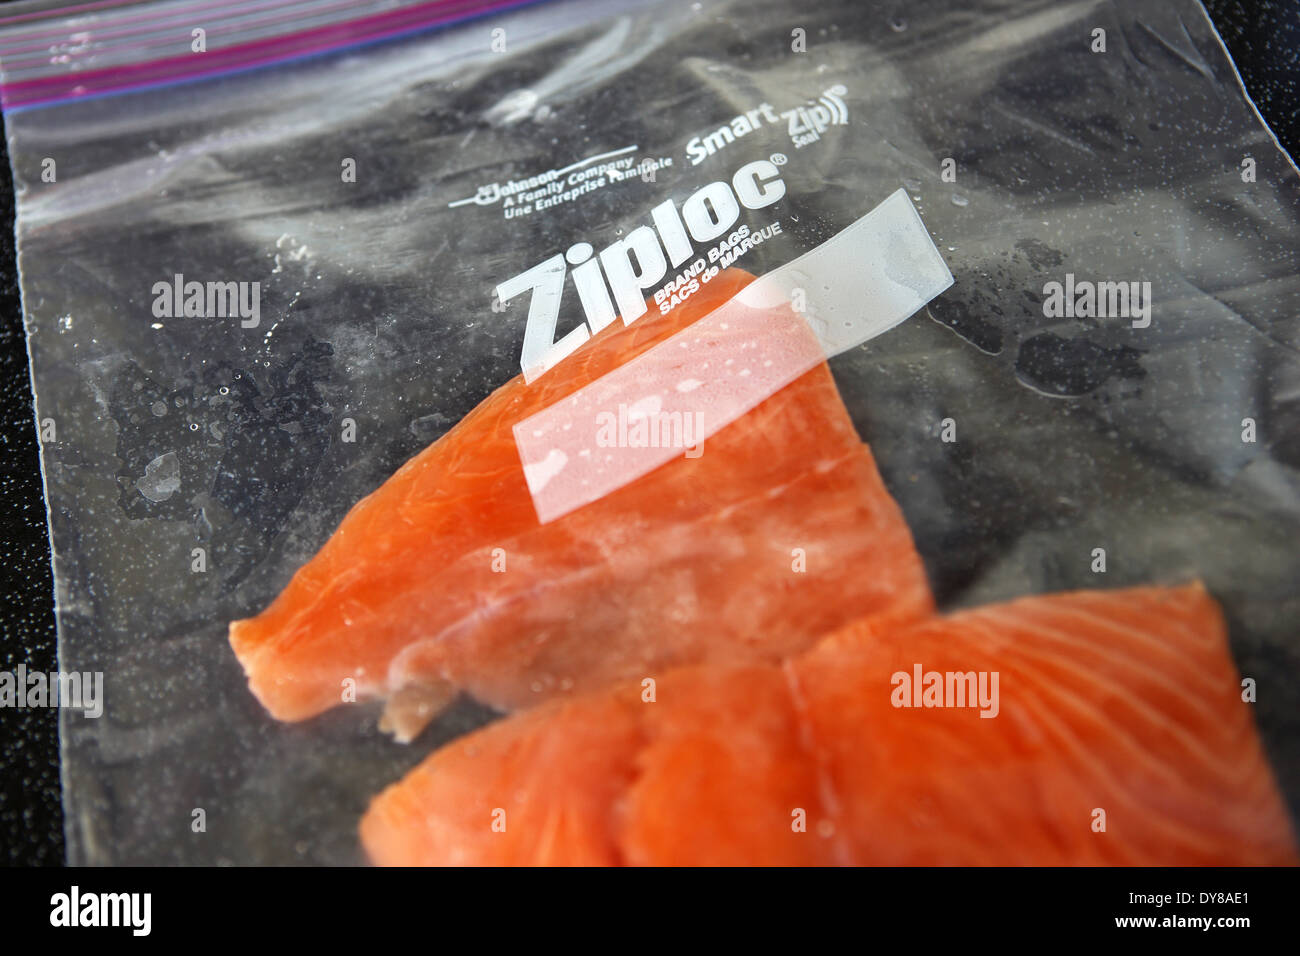 https://c8.alamy.com/comp/DY8AE1/ziploc-bag-containing-salmon-fillets-ready-for-freezing-DY8AE1.jpg